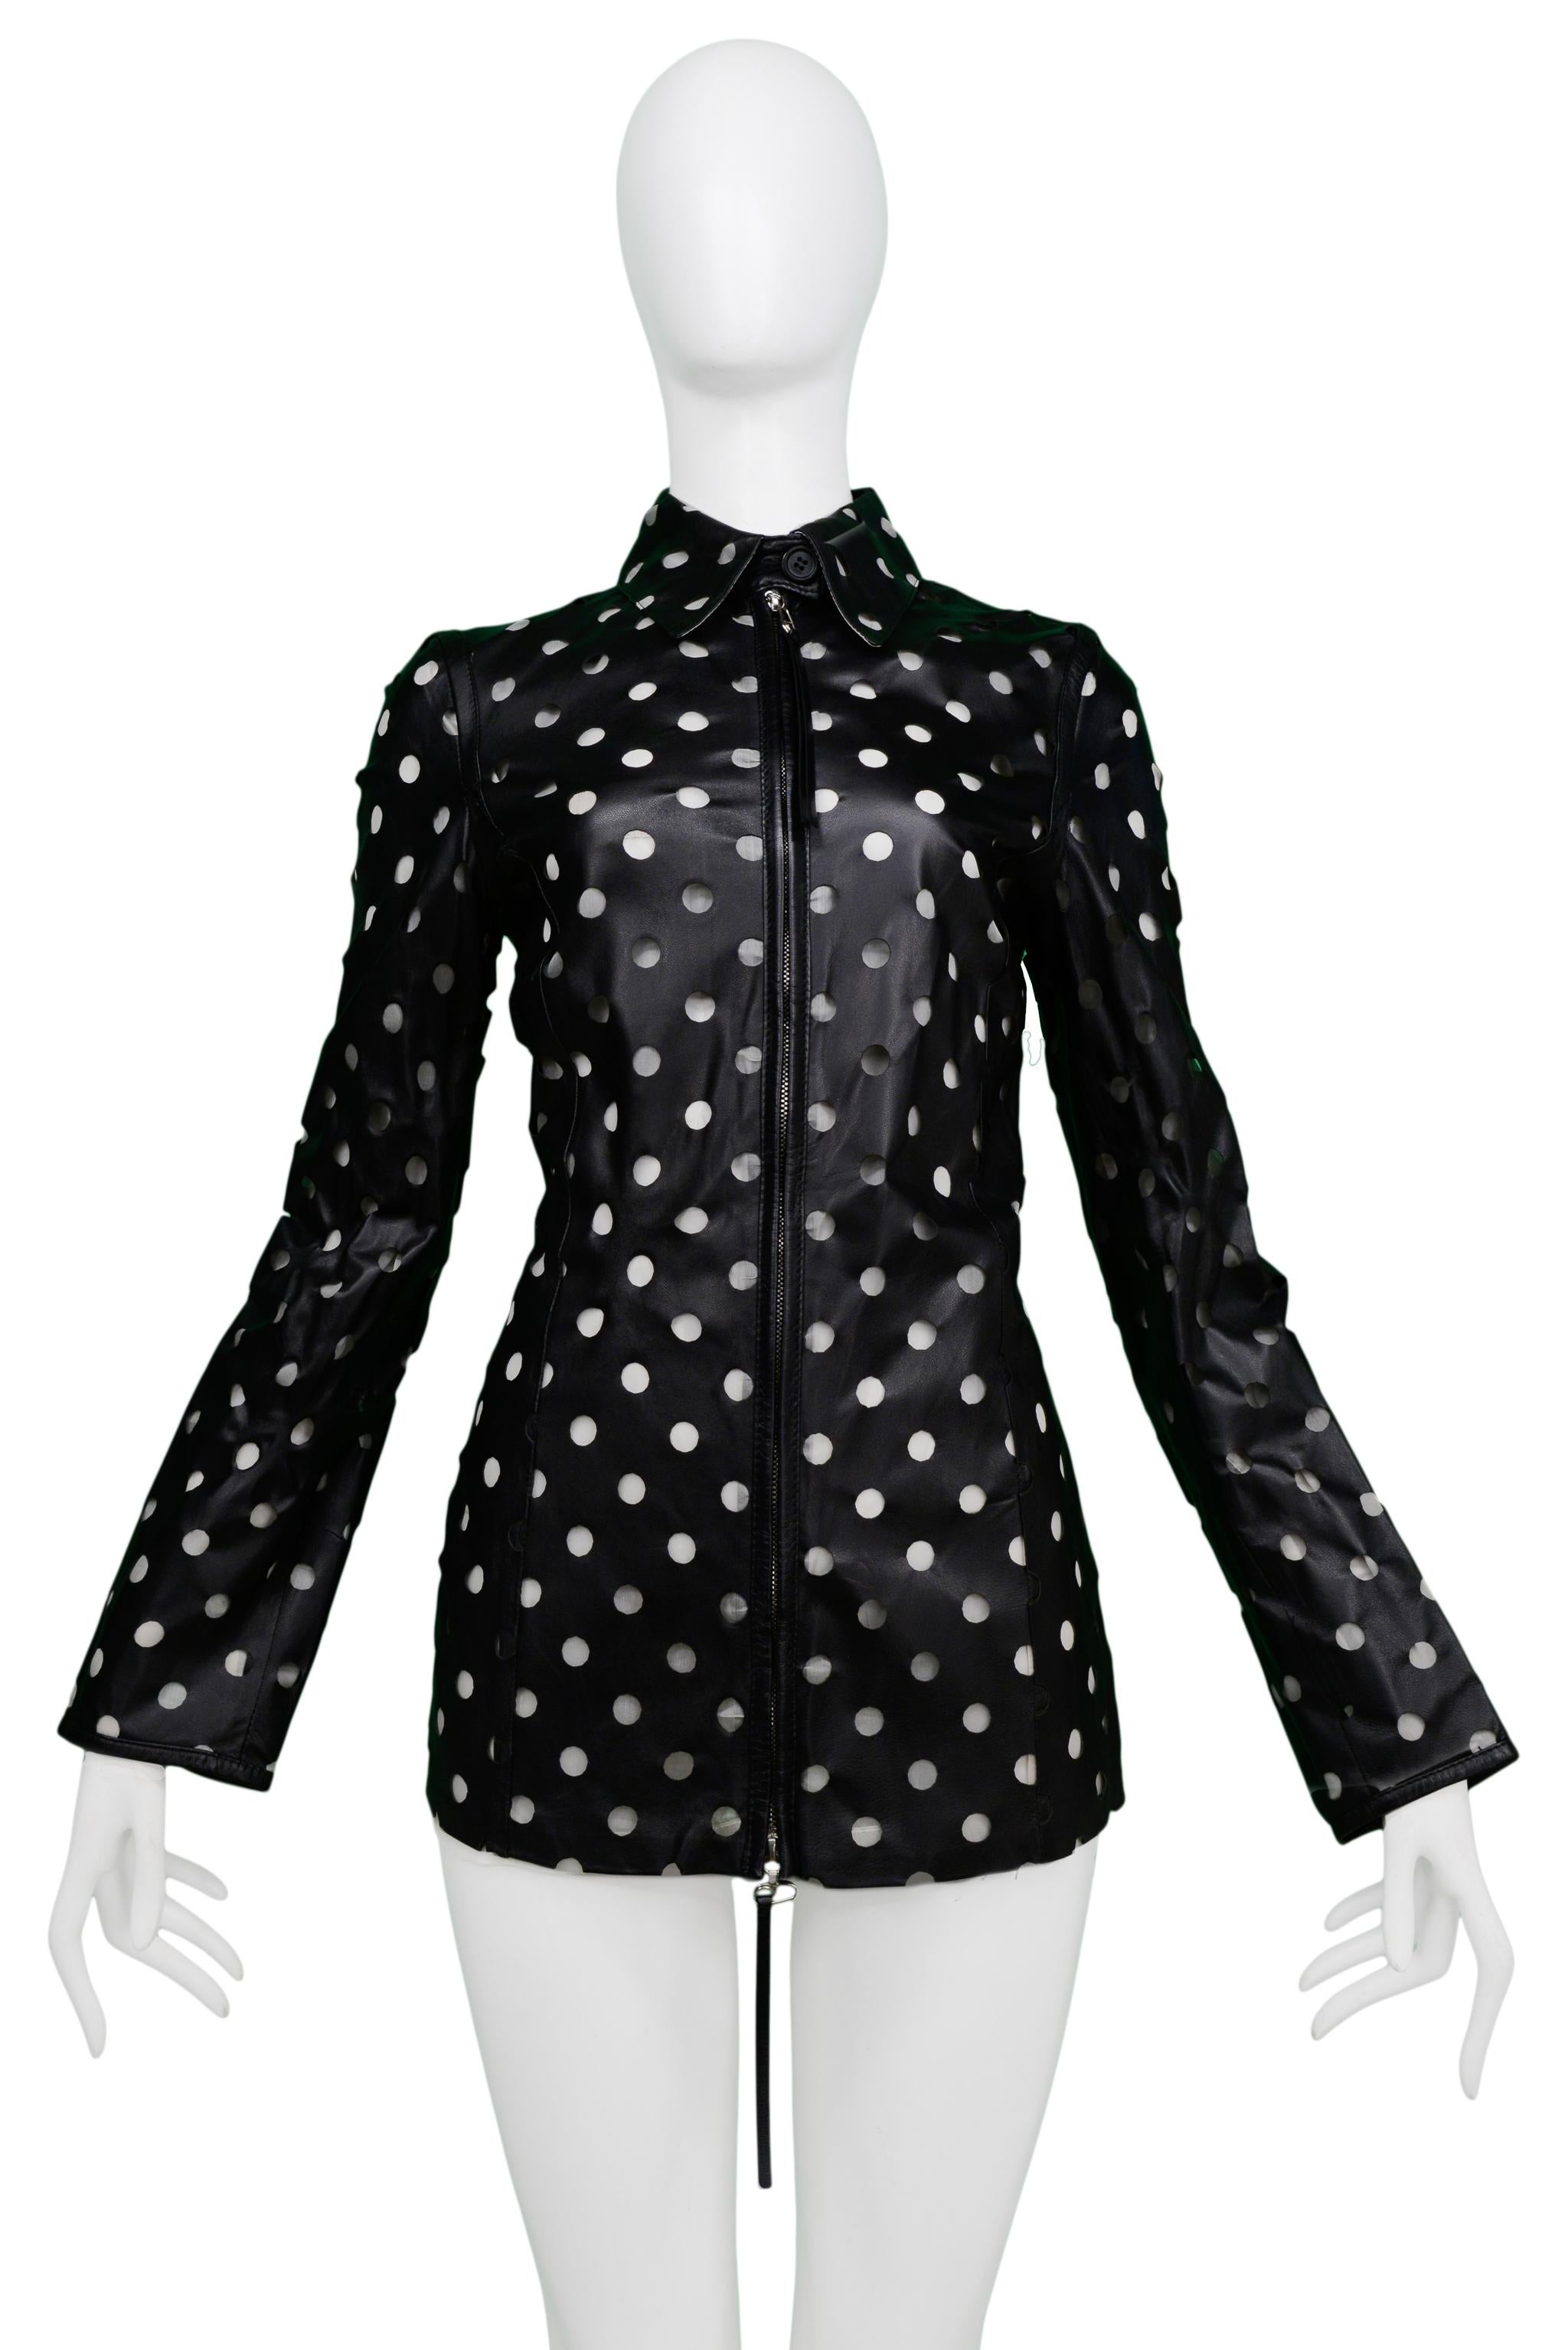 Gianfranco Ferre Black Leather Cut-Out Dot Jacket In Excellent Condition For Sale In Los Angeles, CA